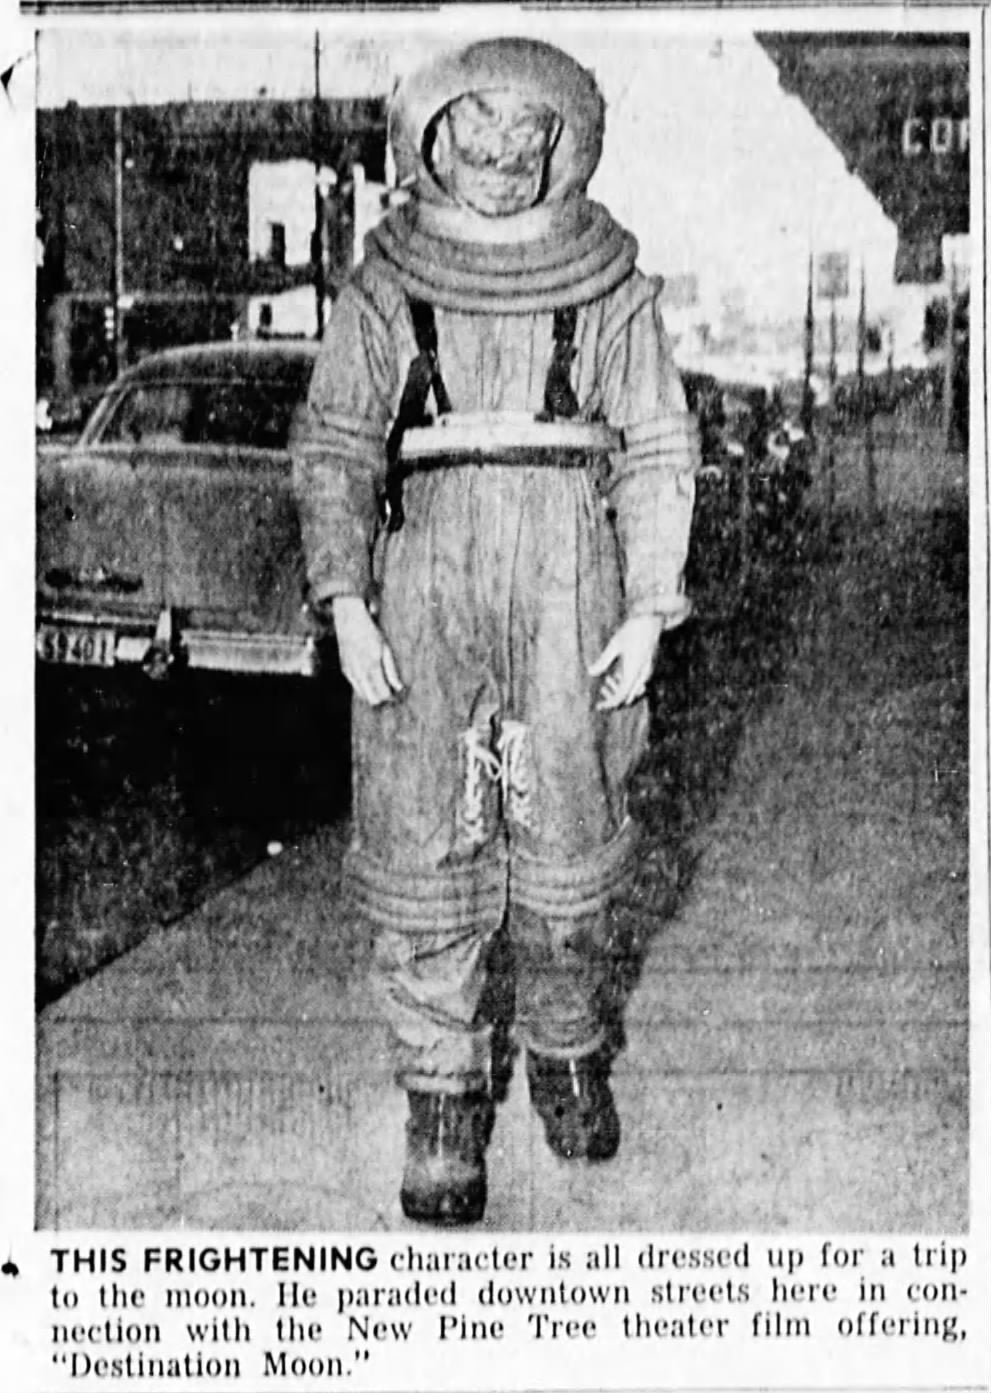 Promotion for "Destination Moon" at the Pine Tree theater, 1951